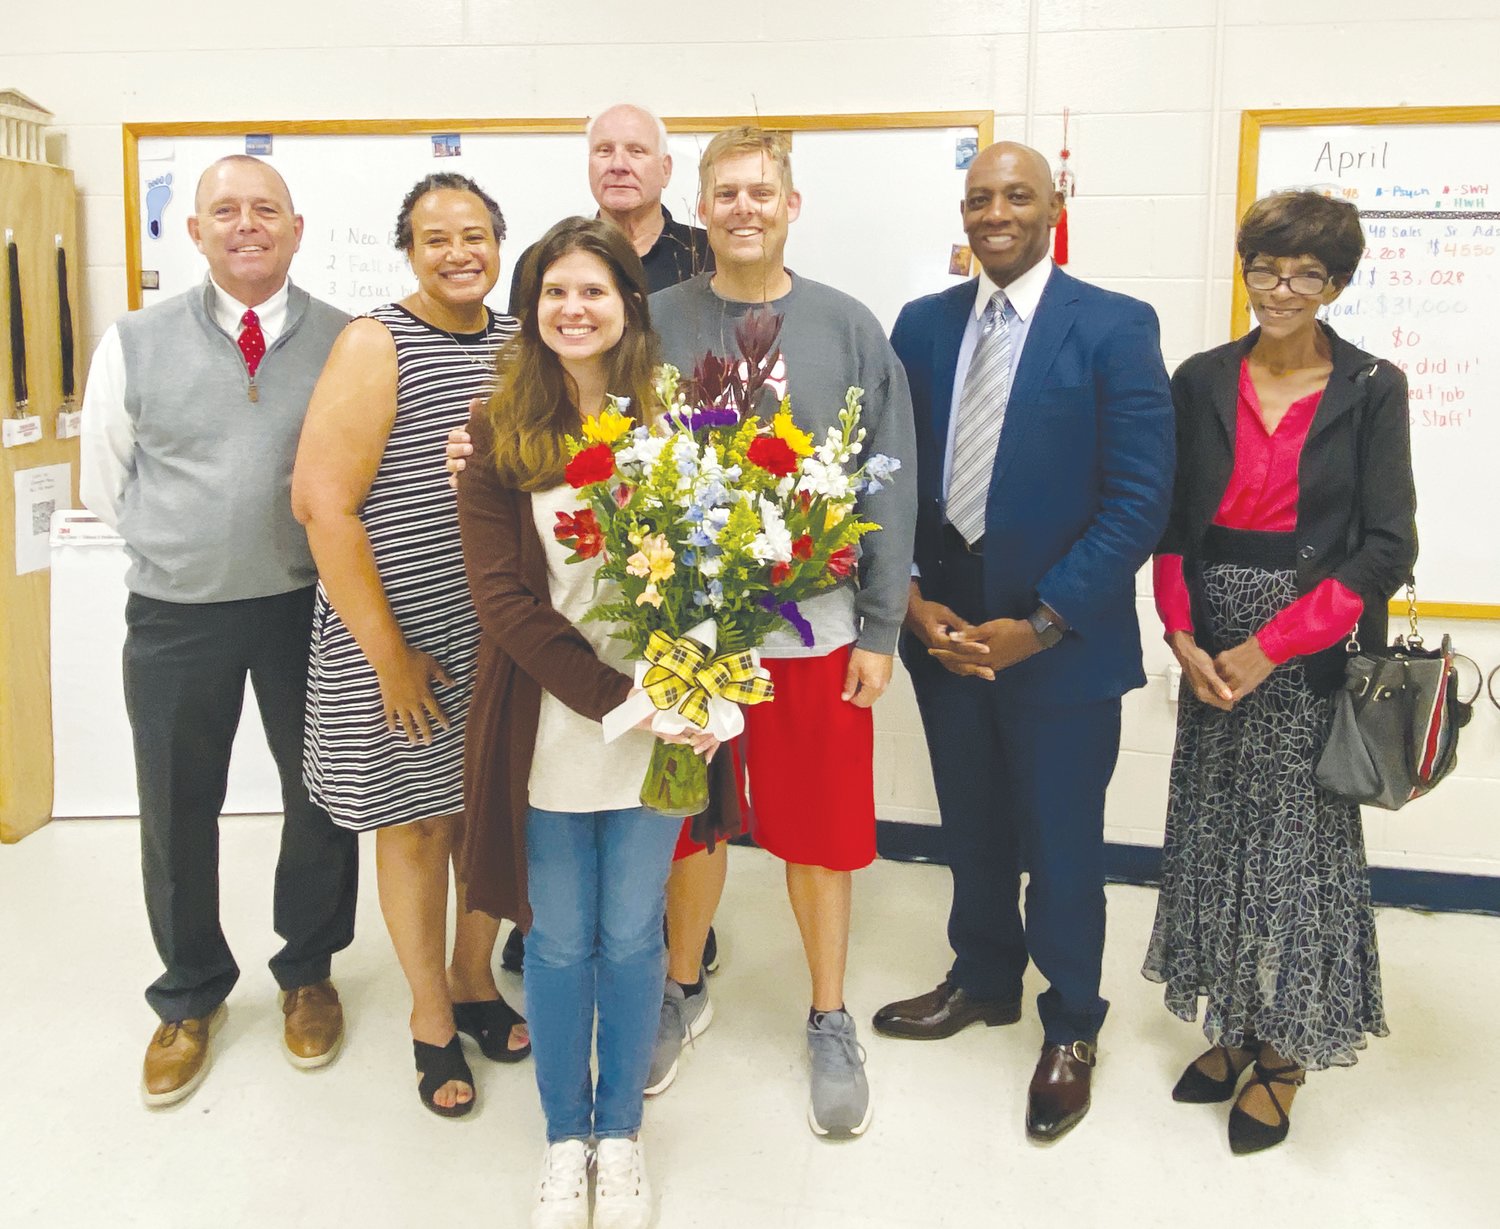 Chatham County school board Chairperson Gary Leonard (from left), Chatham Central High School Principal Karla Eanes, Teacher of the Year Cassadi Walden, school board member David Hamm, Chatham Central High School teacher Brett Walden, Superintendent Anthony Jackson, and school board member Del Turner.